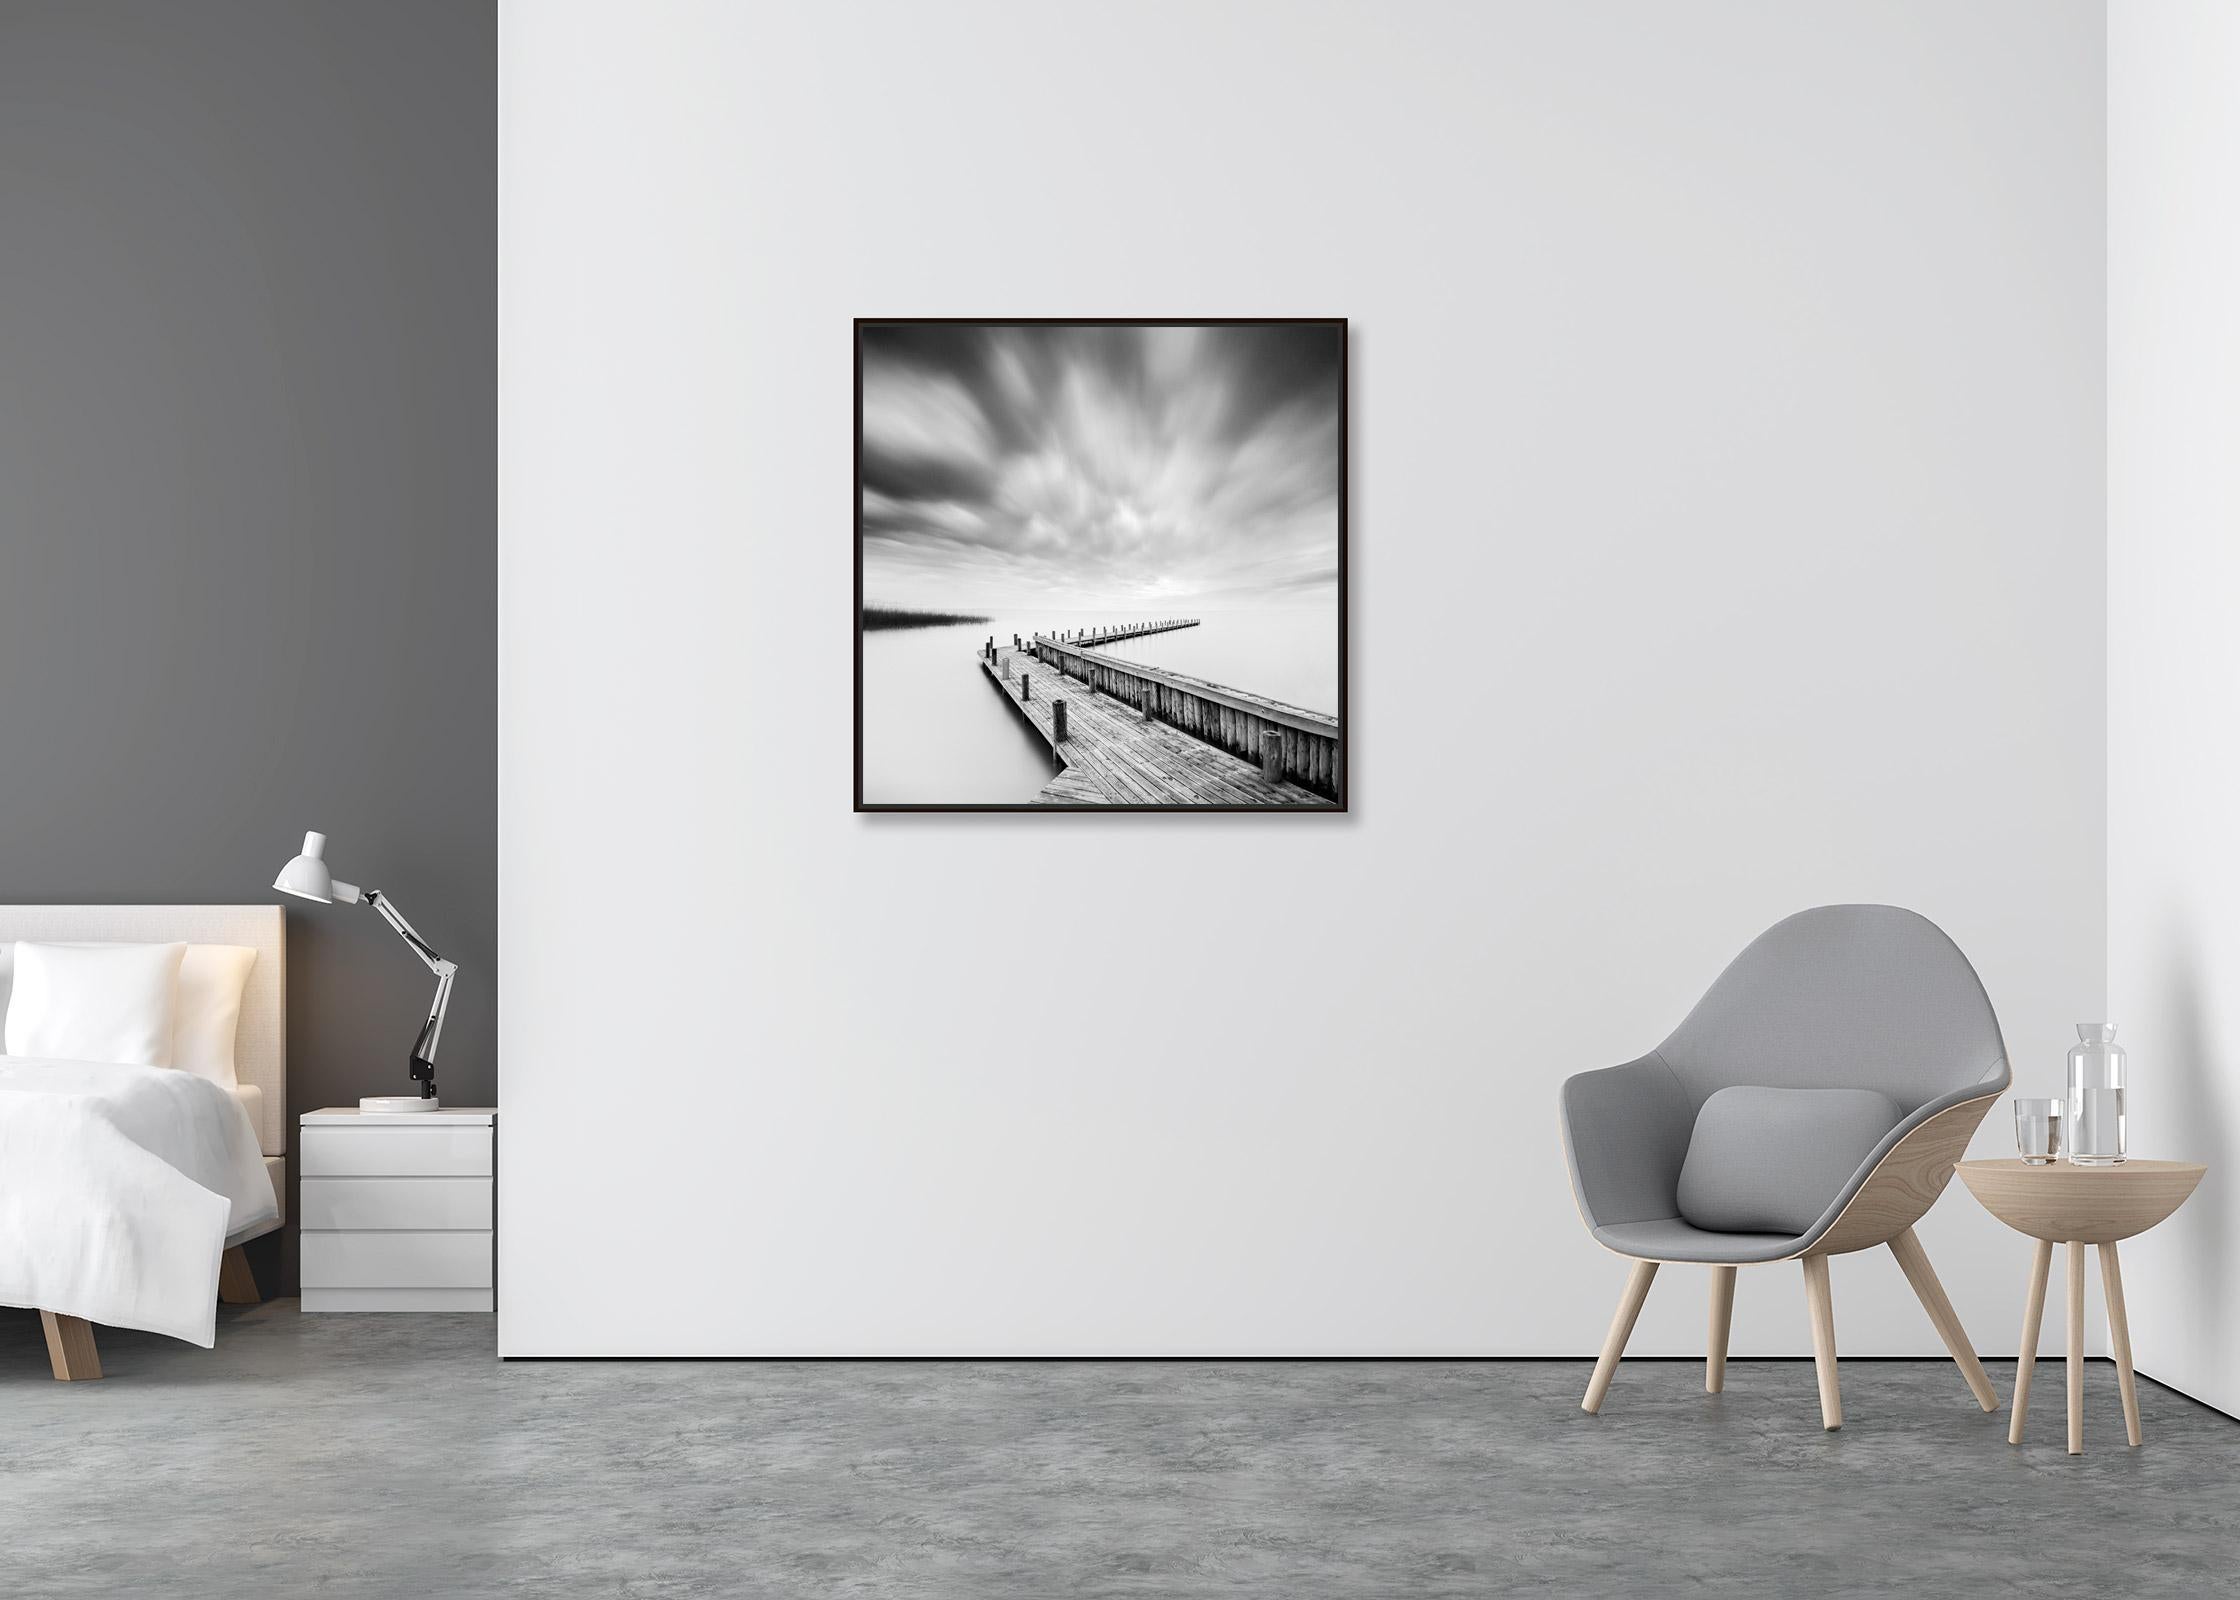 Wood Pier, lake, storm, black & white long exposure art waterscape photography - Contemporary Photograph by Gerald Berghammer